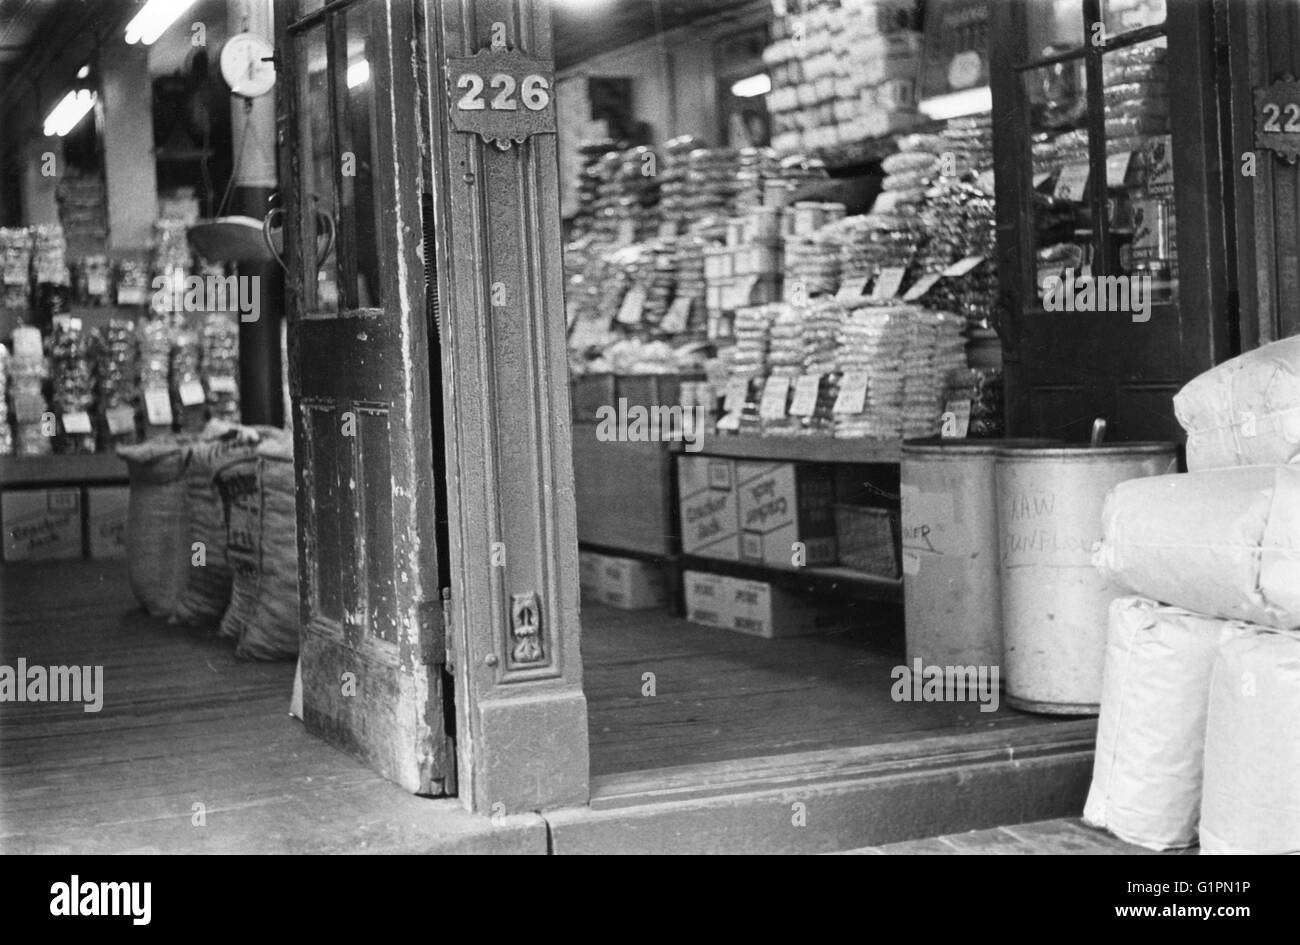 WASHINGTON MARKET, c1960.  The doorway of a shop in Washington Market in Manhattan. Photographed in the early 1960s, shortly before being demolished to make way for the World Trade Center. Stock Photo